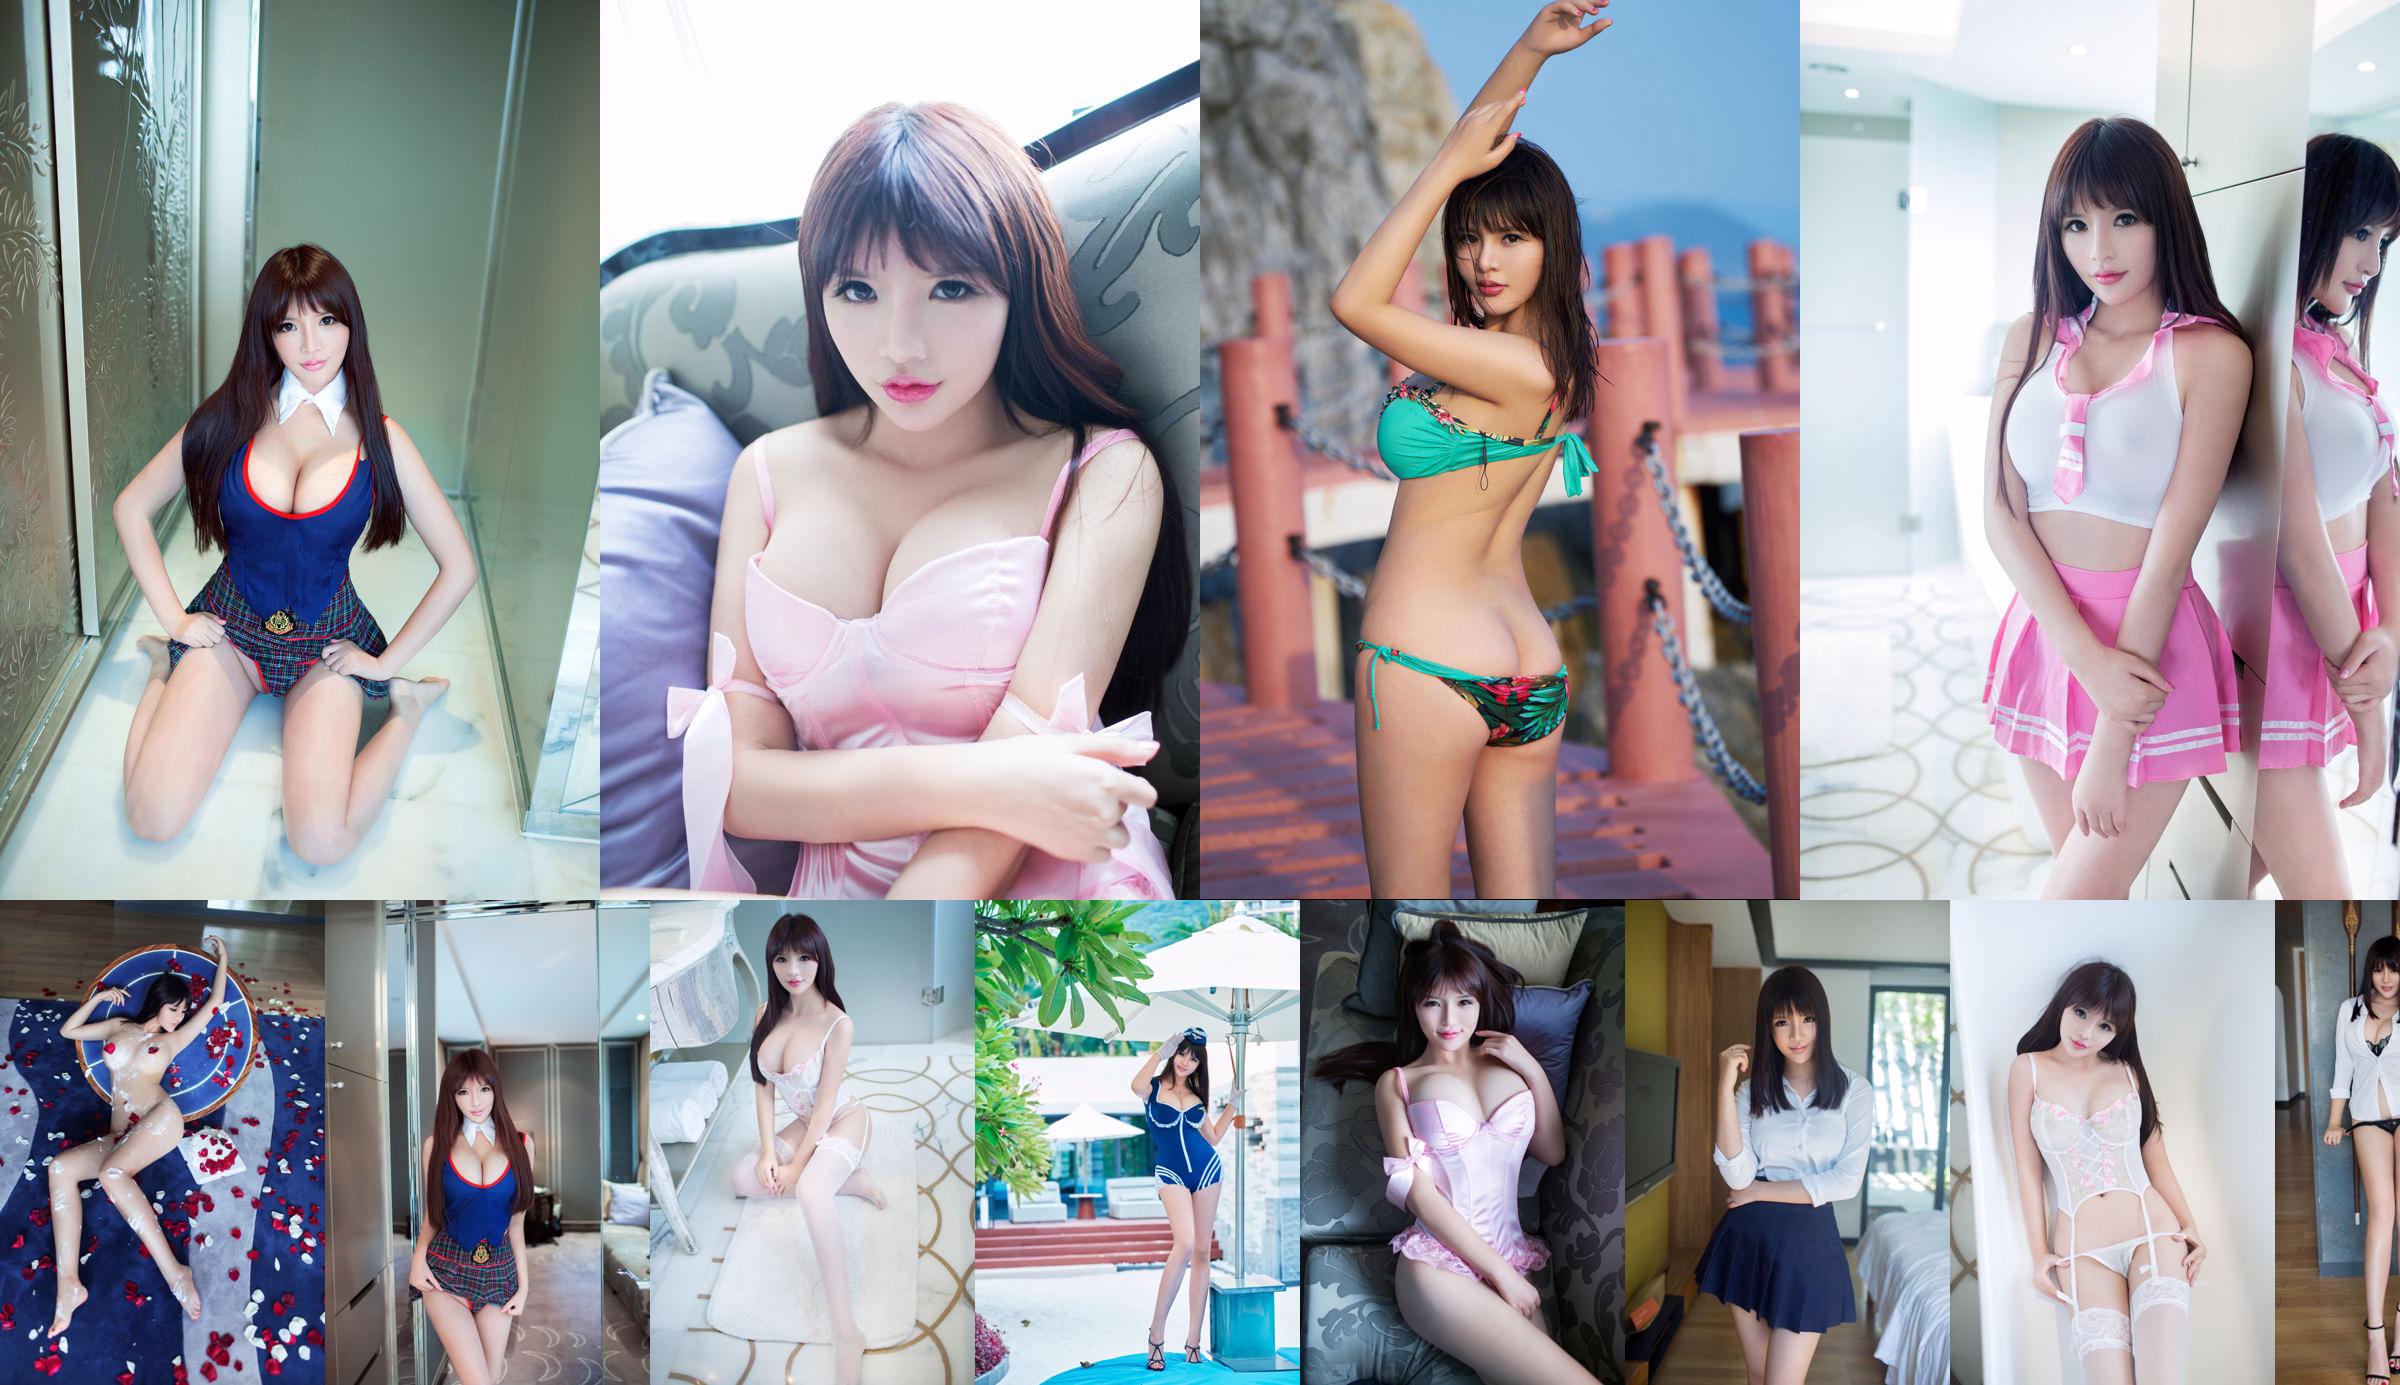 Wang Yimeng "Cute Face with Big Breasts, Tall and White" [Push Girl TuiGirl] No.063 No.4ed27f Page 1